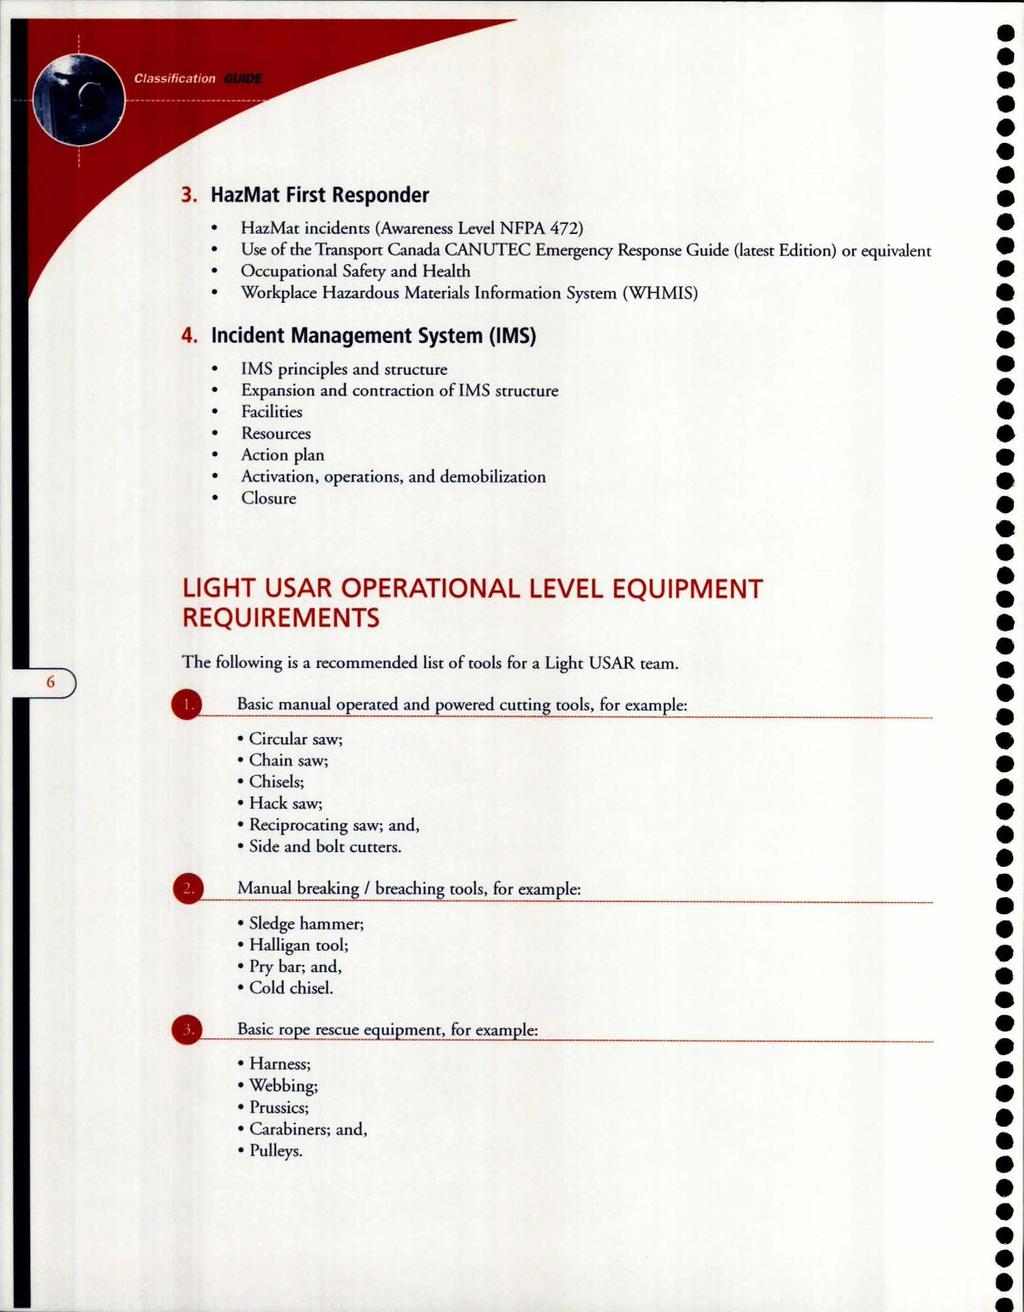 3. HazMat First Responder HazMat incidents (Awareness Level NFPA 472) Use of the Transport Canada CANUTEC Emergency Response Guide (latest Edition) or equivalent Occupational Safety and Health